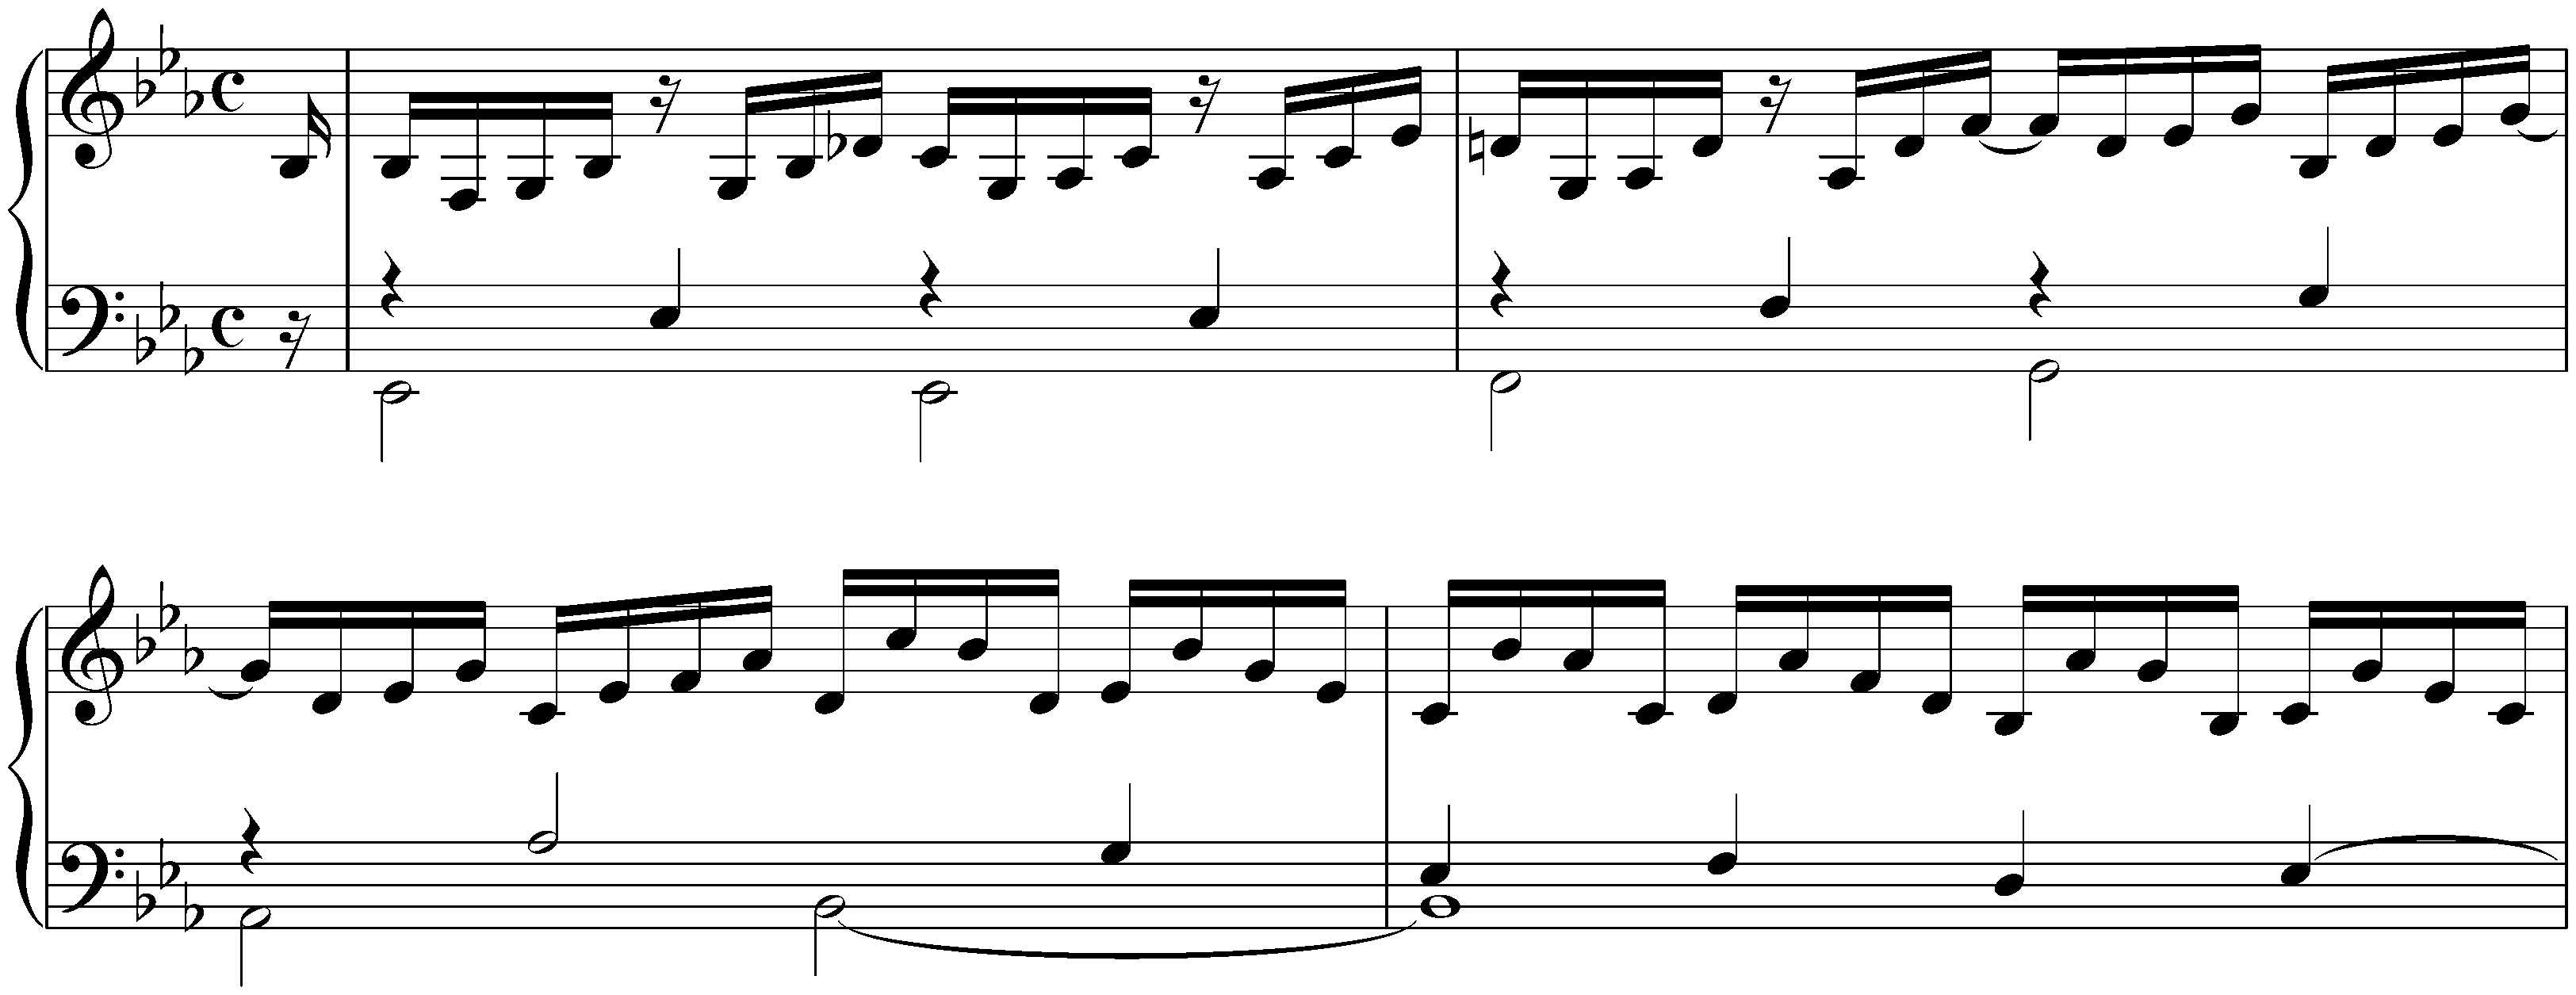 French Suite no. 4 in E-flat major, BWV 815; 1. (1.) Allemande